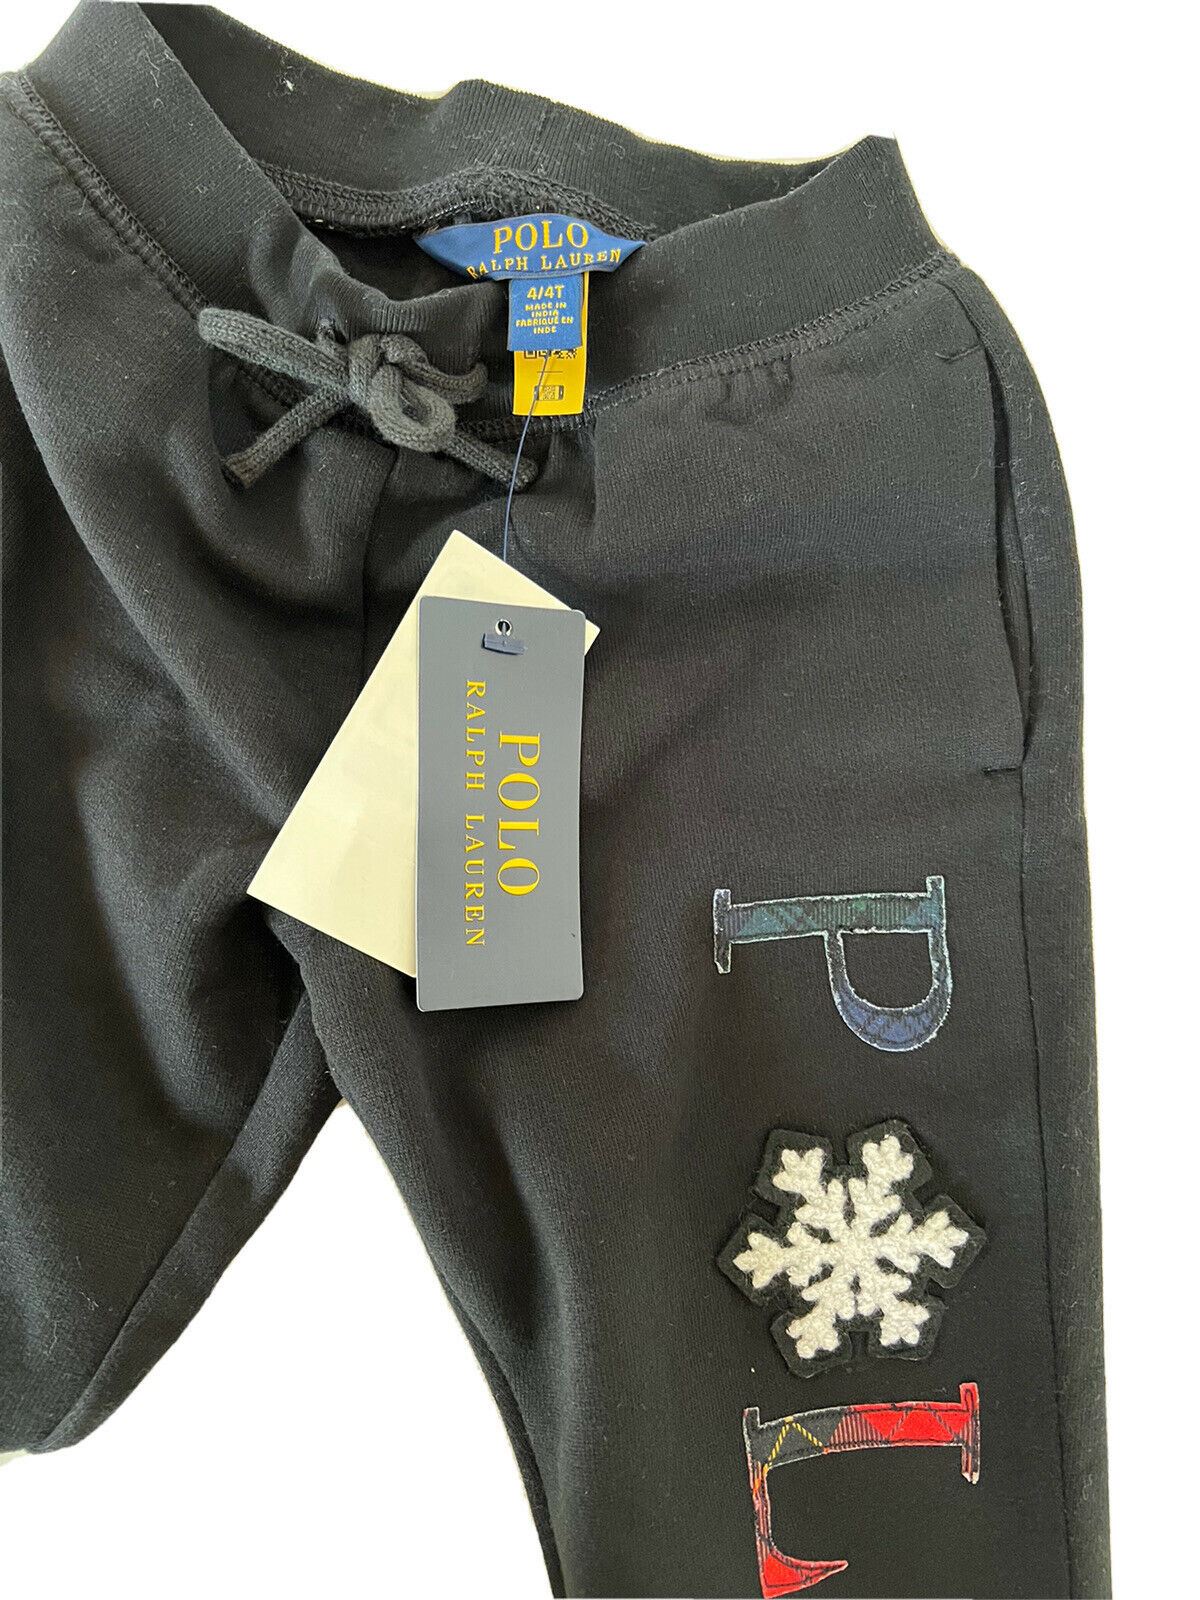 NWT Polo Ralph Lauren Boy's Black Snow Flake Casual Pant 4 Made in India